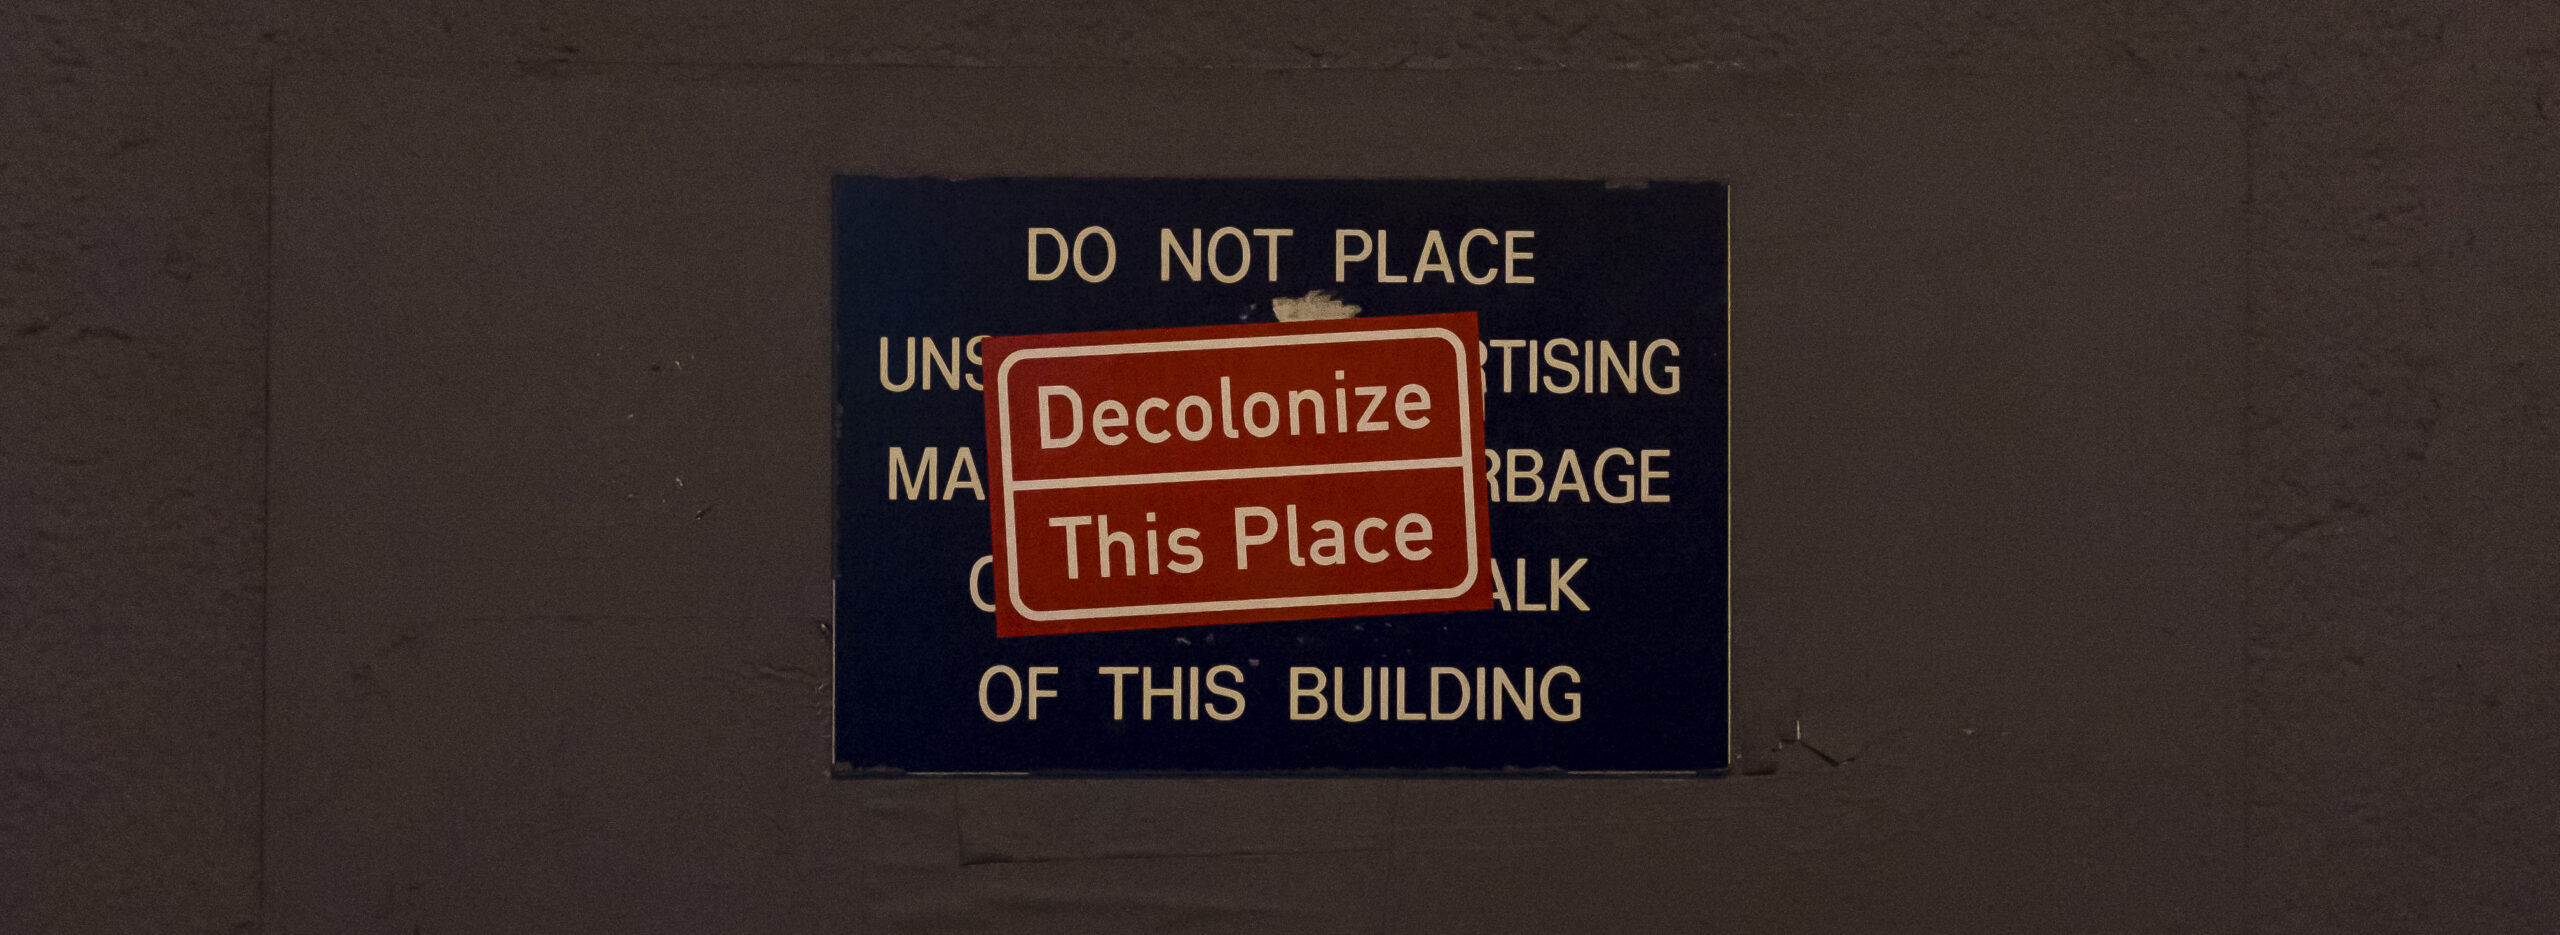 A sign on a plain brown wall that reads “do not place...” is obscured by a red sticker saying “Decolonise this place”